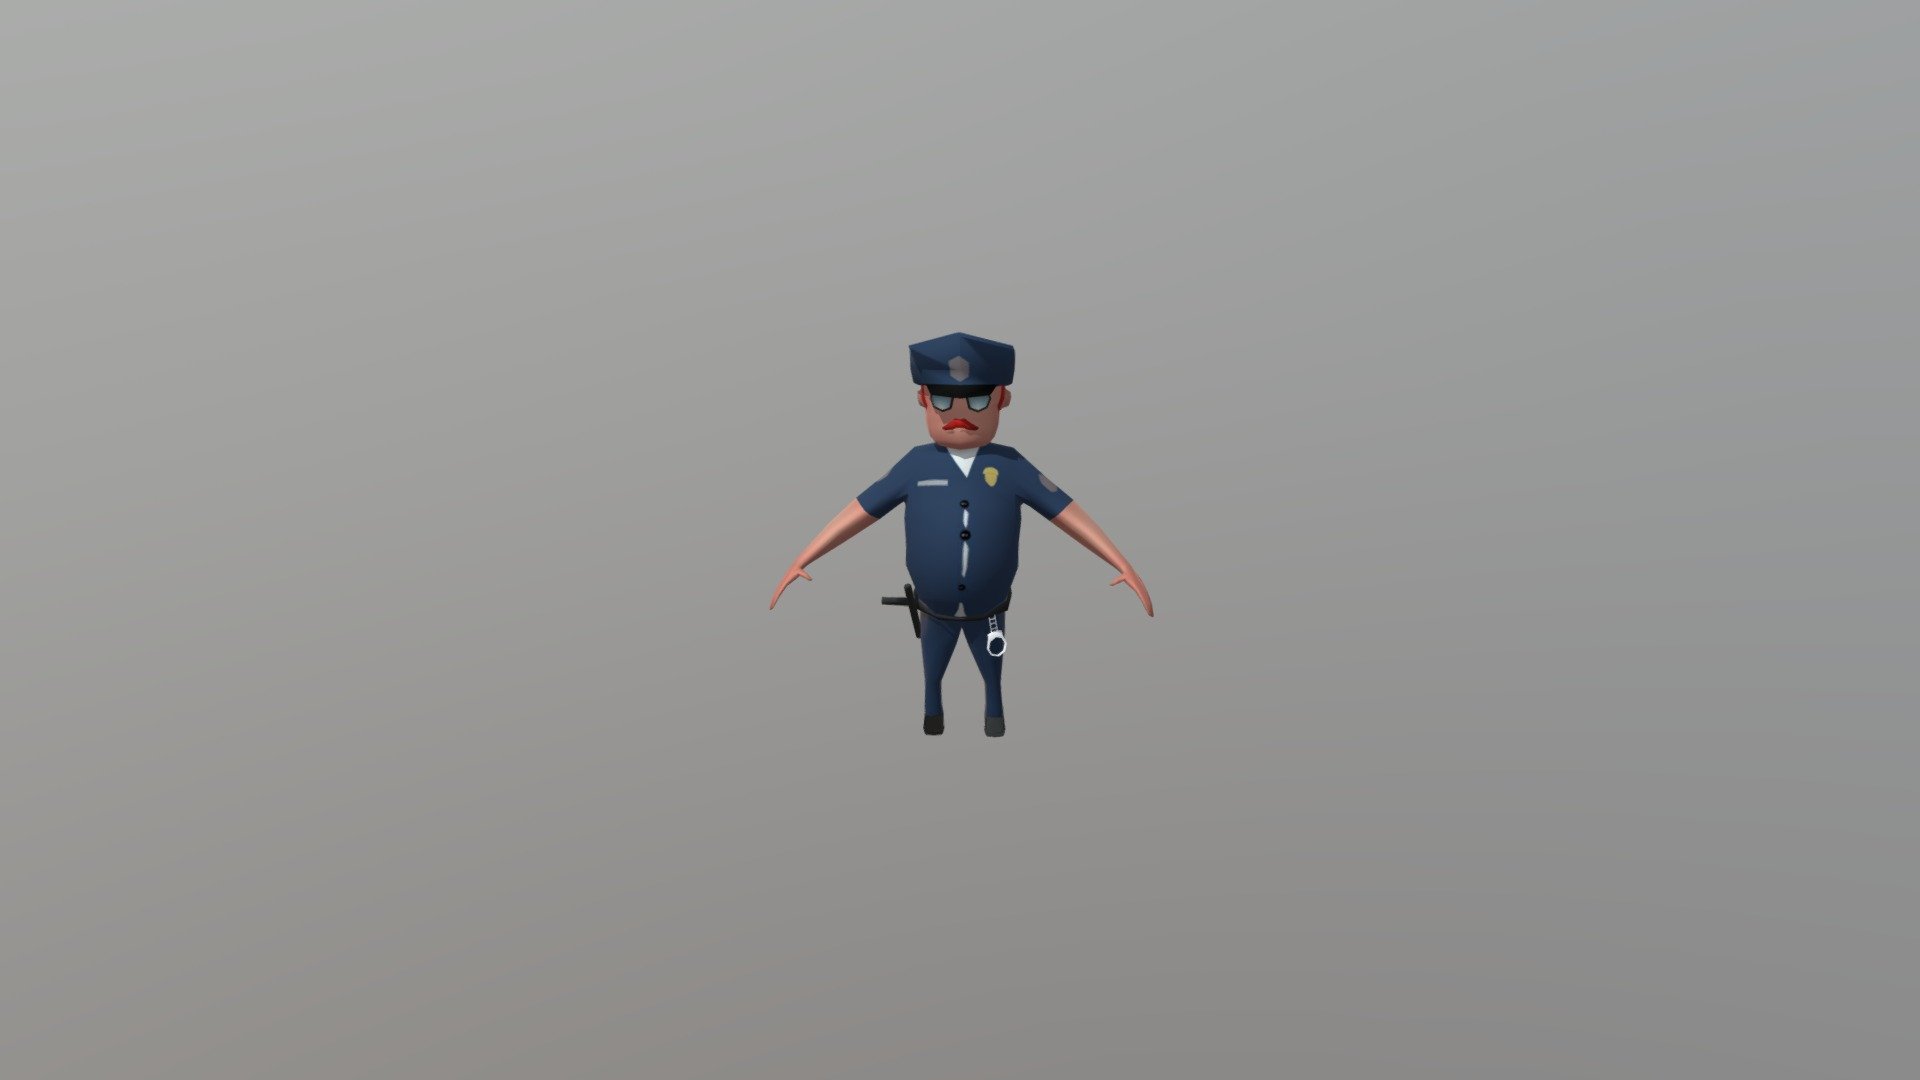 White low-poly police character with texture
Files:
* .blend
* .obj
* .fbx - POLICE - Download Free 3D model by Ferrozo (@wilsoncotripa) 3d model